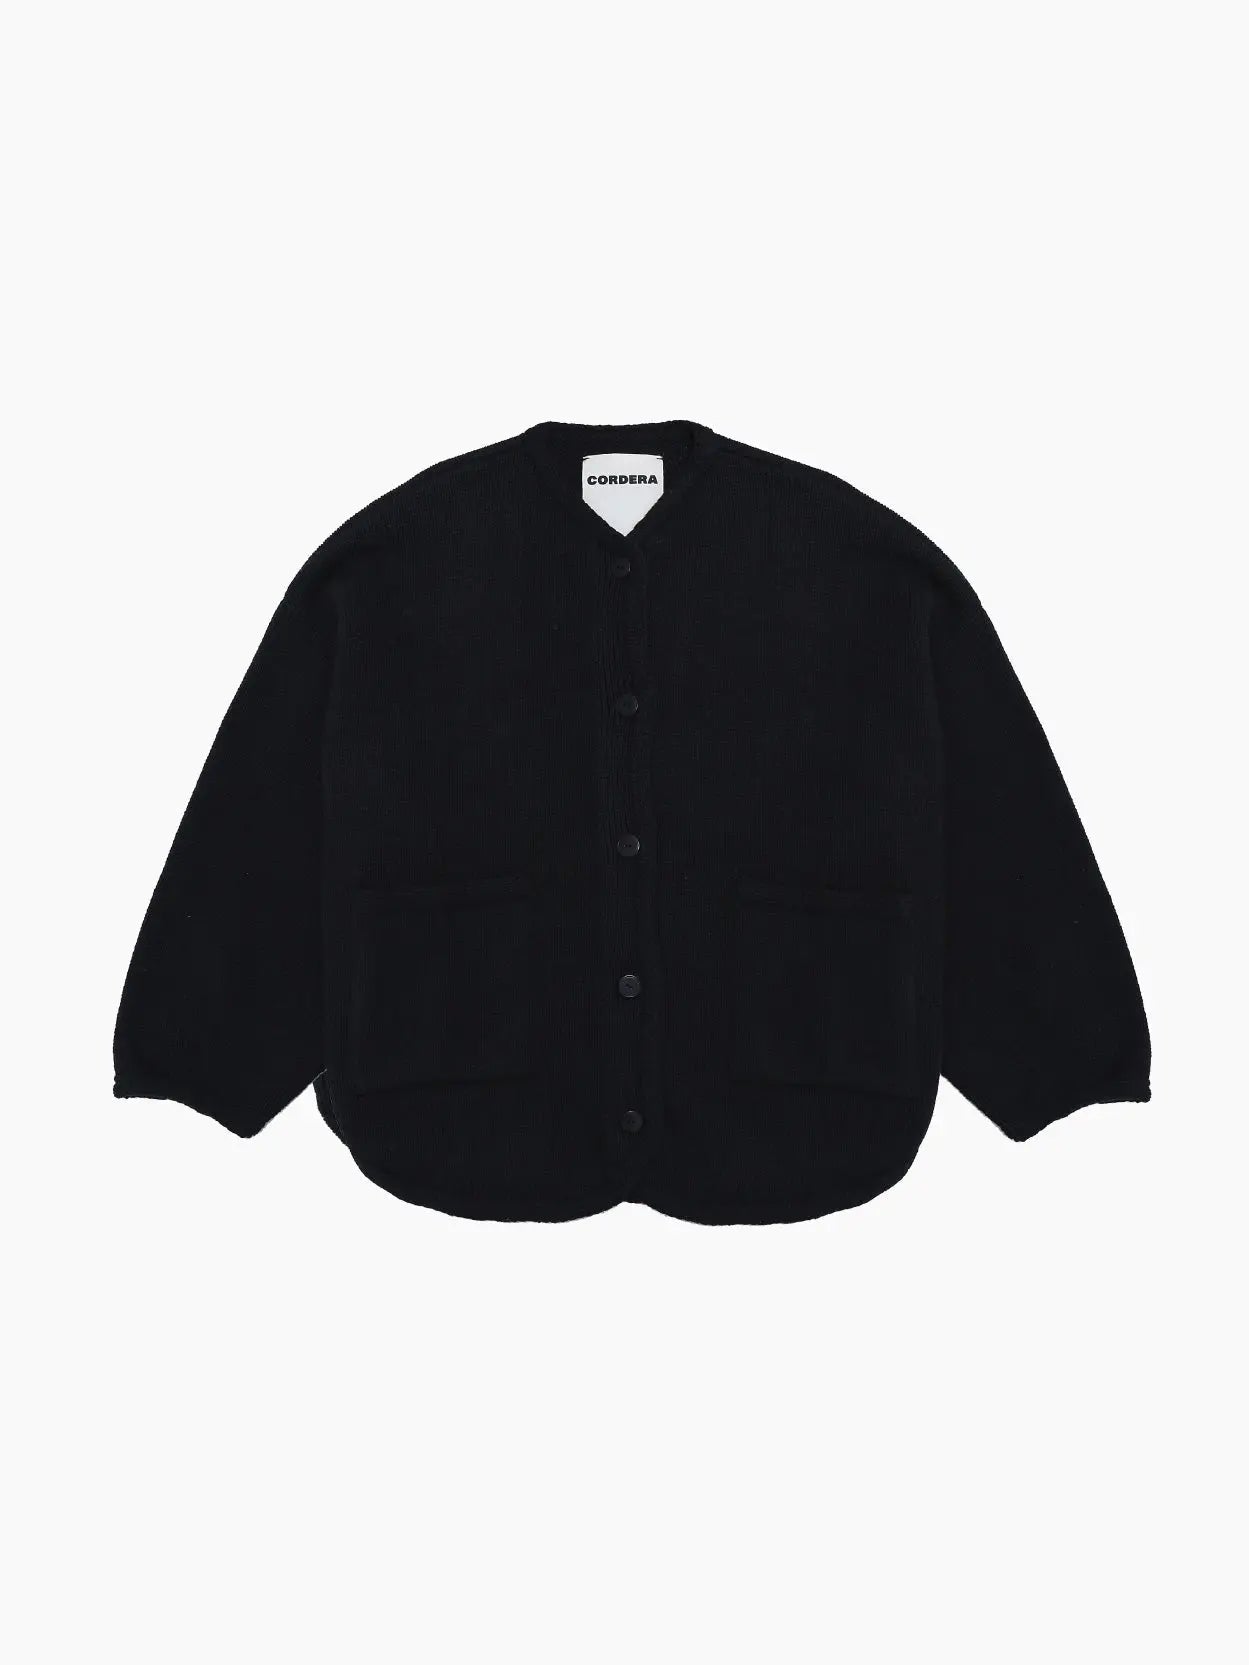 A black, long-sleeved Cotton Jacket Black with a round neckline, button-down front, and two front pockets. The jacket appears to be made of thick, cozy fabric, ideal for cooler weather. The label inside the collar reads "Cordera," available at Bassal Store in Barcelona.